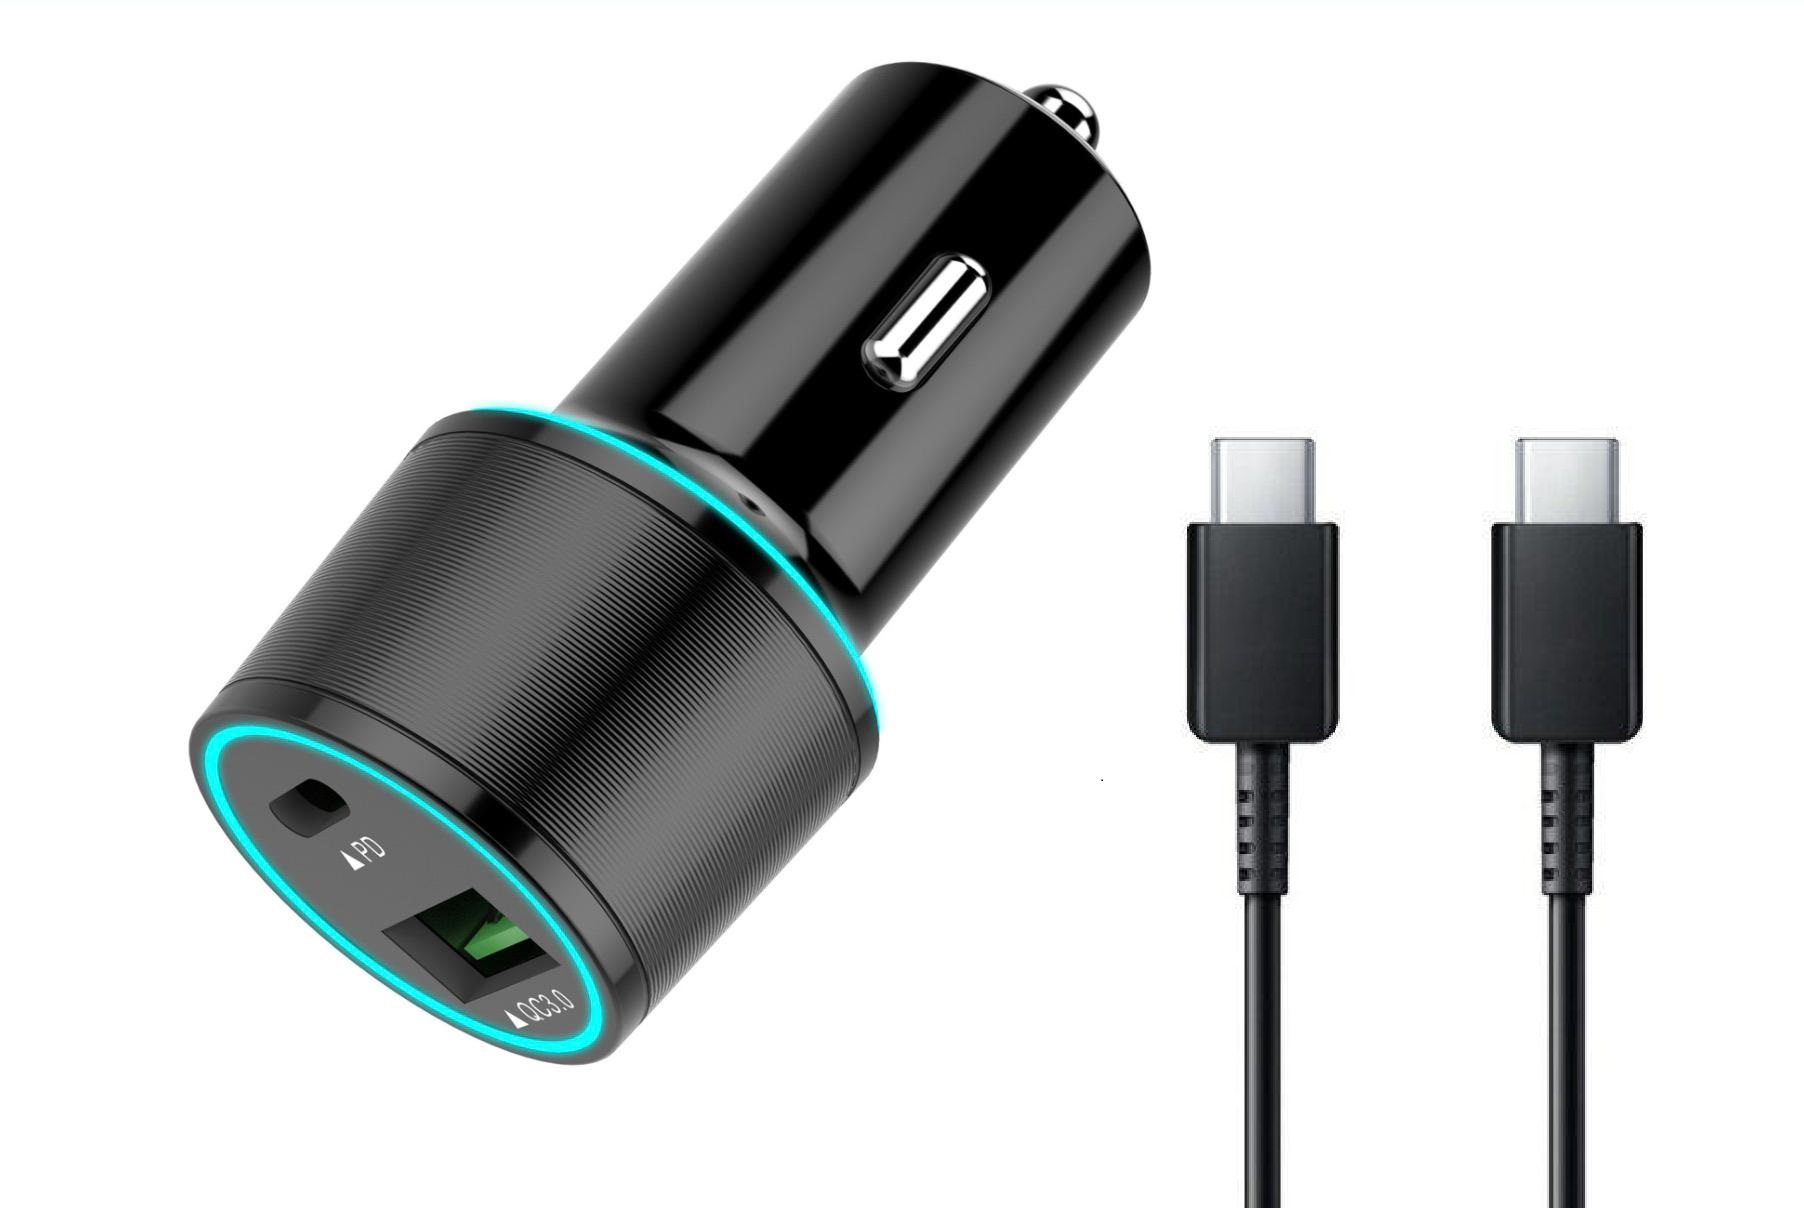 USB C Car Charger UrbanX 20W Car and Truck Charger For Samsung Galaxy A8s with Power Delivery 3.0 Cigarette Lighter USB Charger - Black, Comes with USB C to USB C PD Cable 3.3FT 1M - image 1 of 3